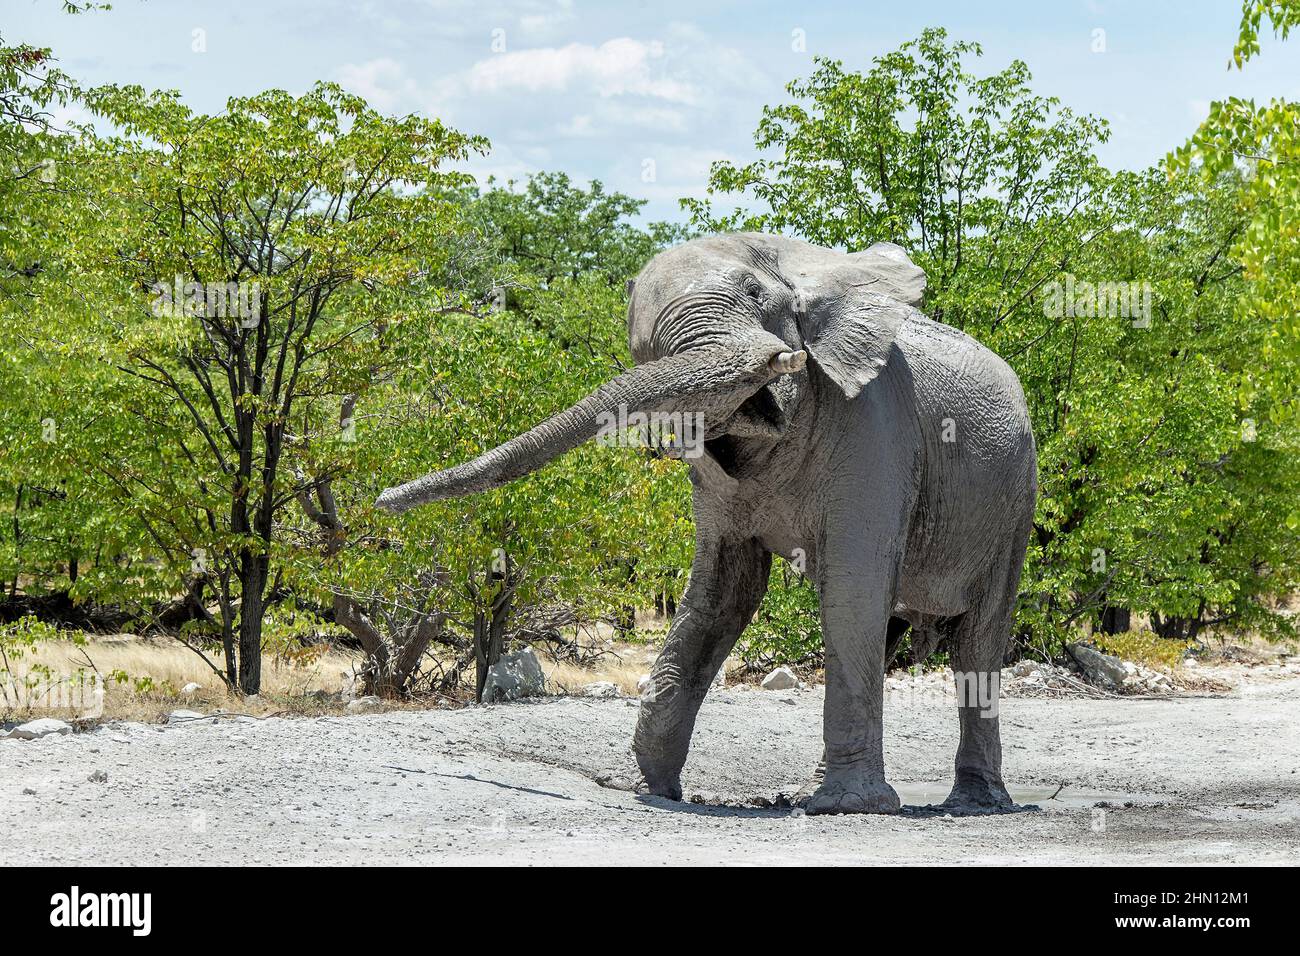 Elephant swinging his trunk and waggling shaking his head in warning. Stock Photo